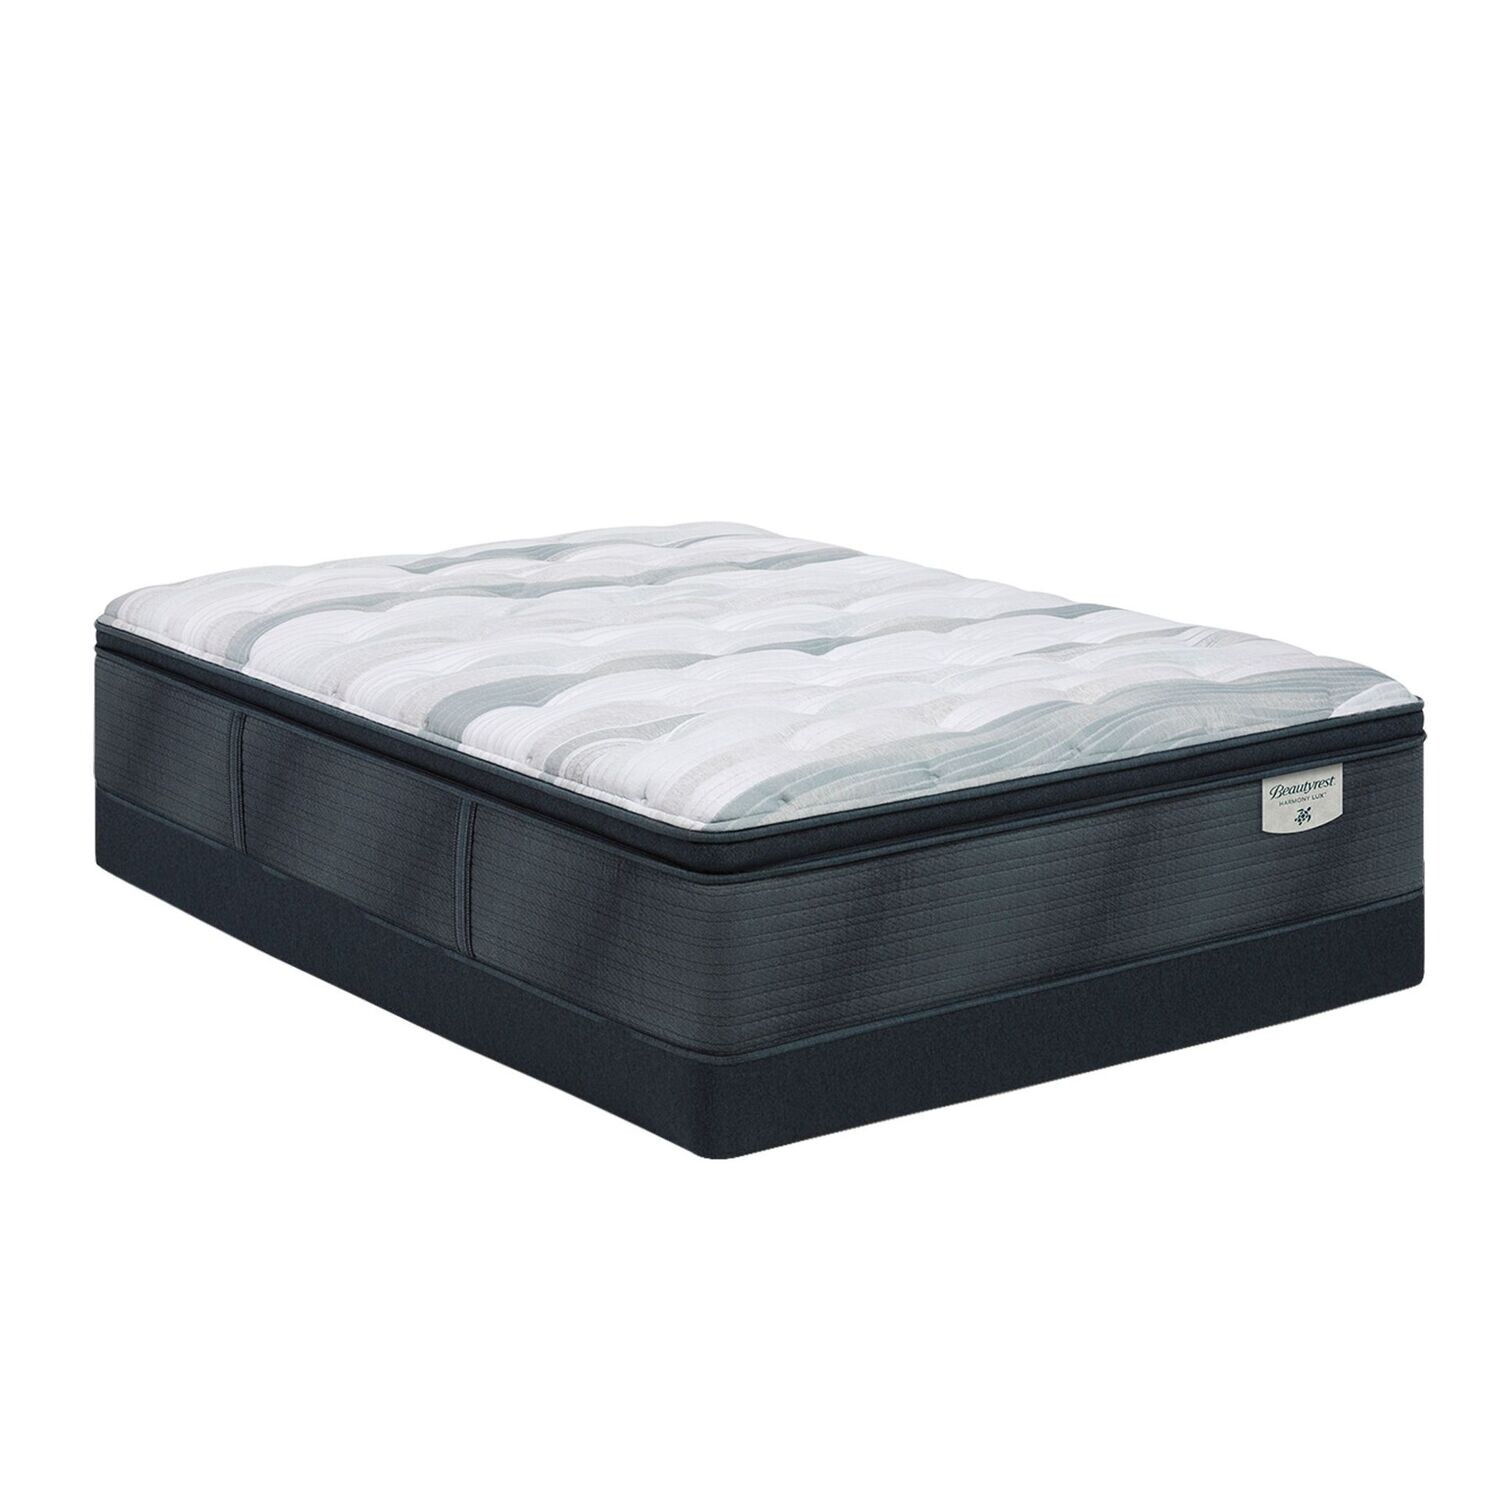 BeautyRest Harmony Lux Medium, Size: Queen, Add a Base: No Base